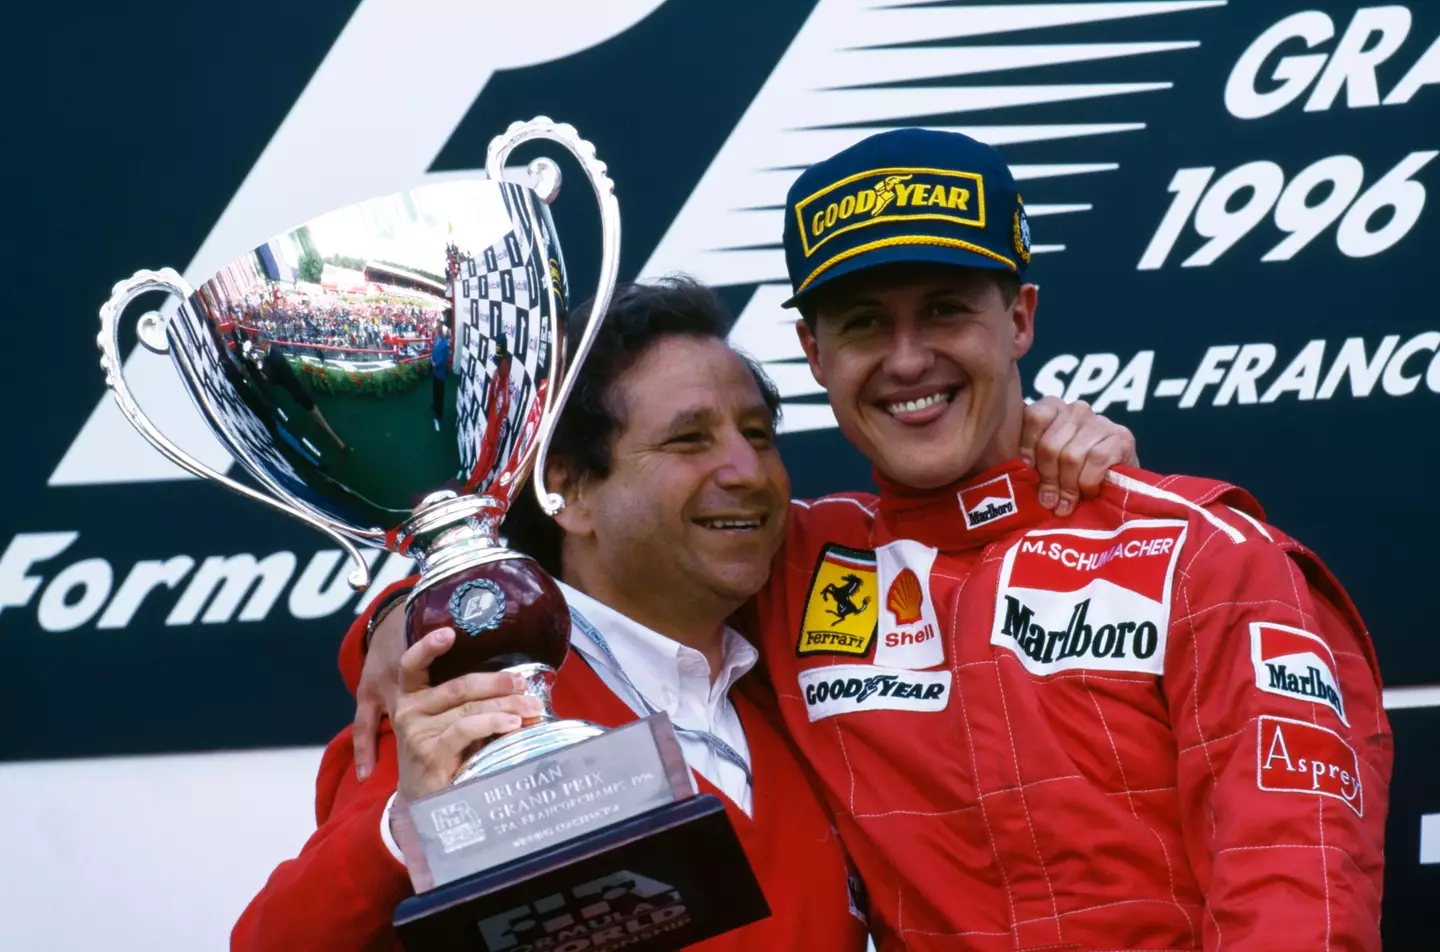 Jean Todt and Michael Schumacher were incredibly successful together in Formula One.